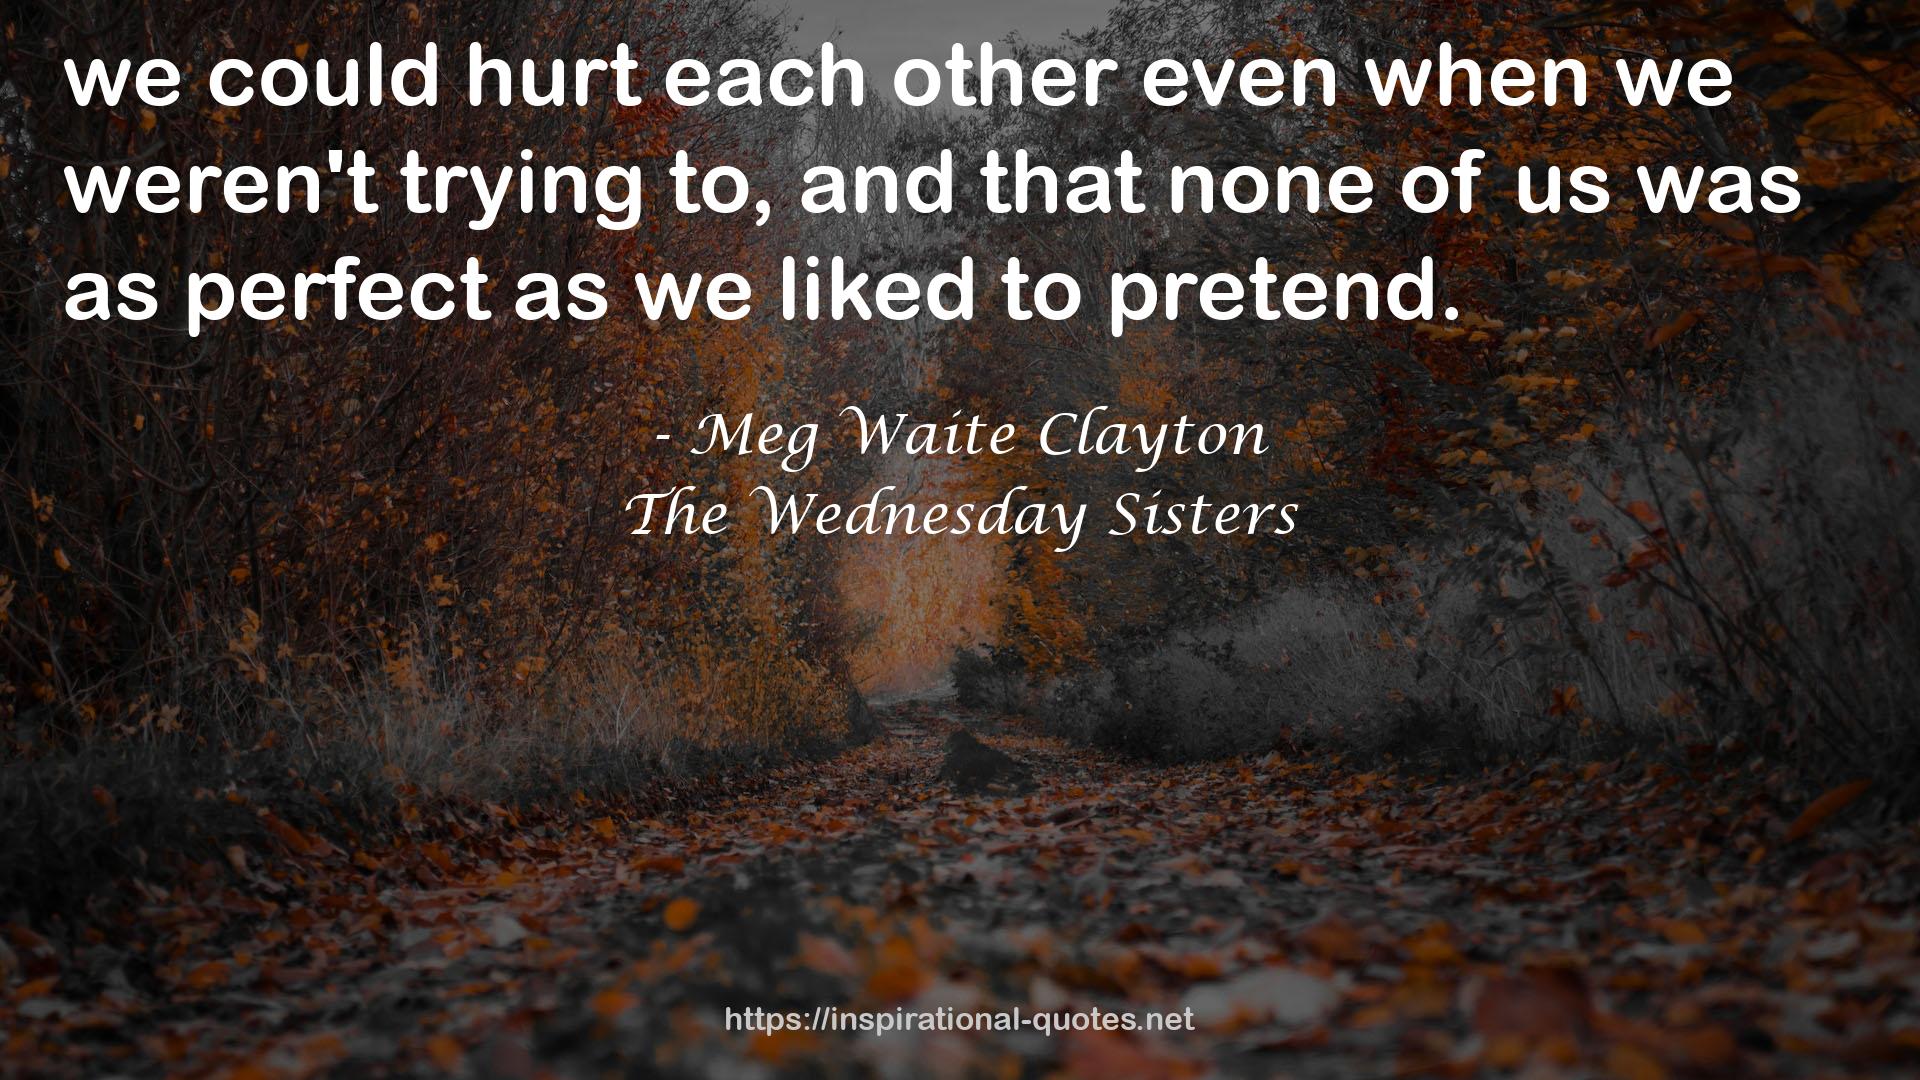 The Wednesday Sisters QUOTES